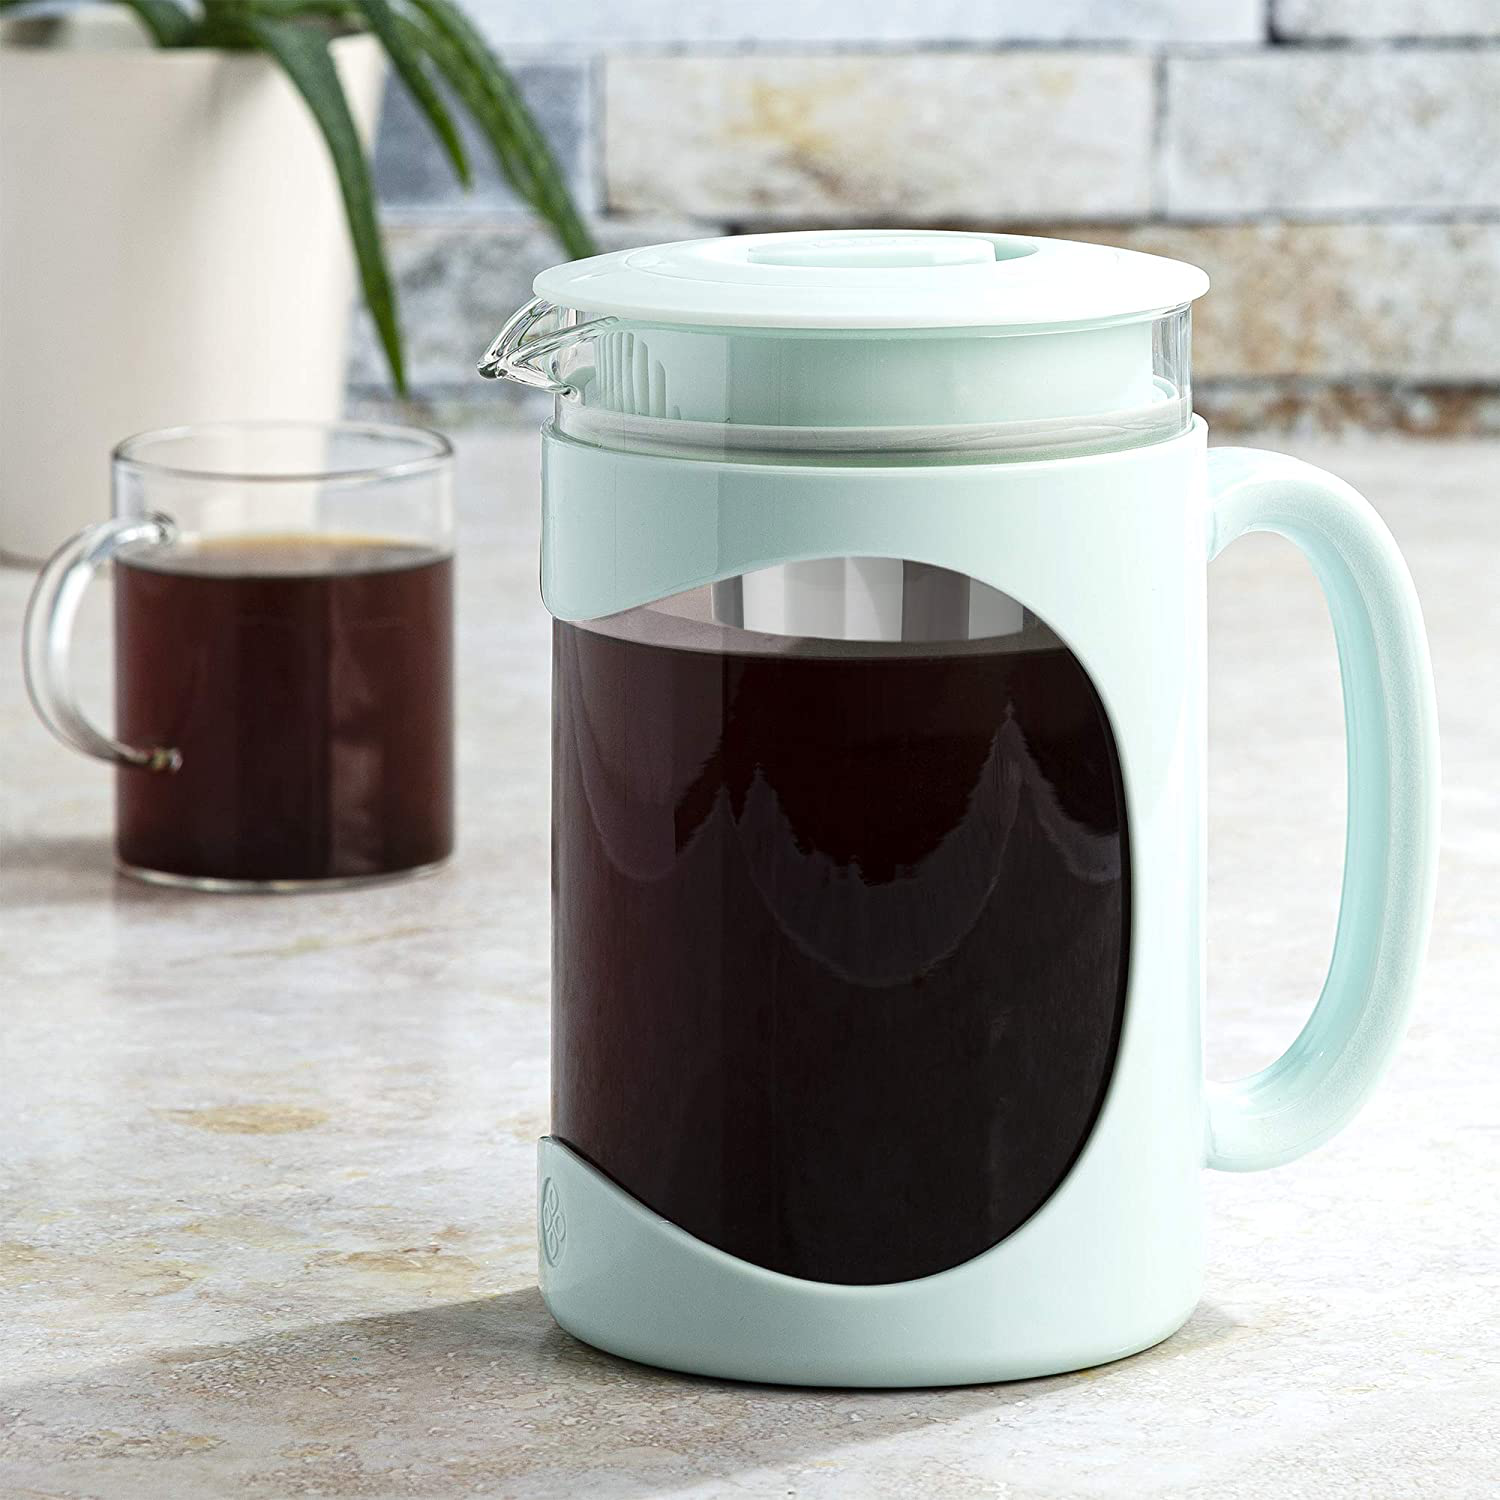 Primula Burke Deluxe Cold Brew Iced Coffee Maker, Comfort Grip Handle, Durable Glass Carafe, Removable Mesh Filter, Perfect 6 Cup Size, Dishwasher Safe, 1.6 Qt, Aqua